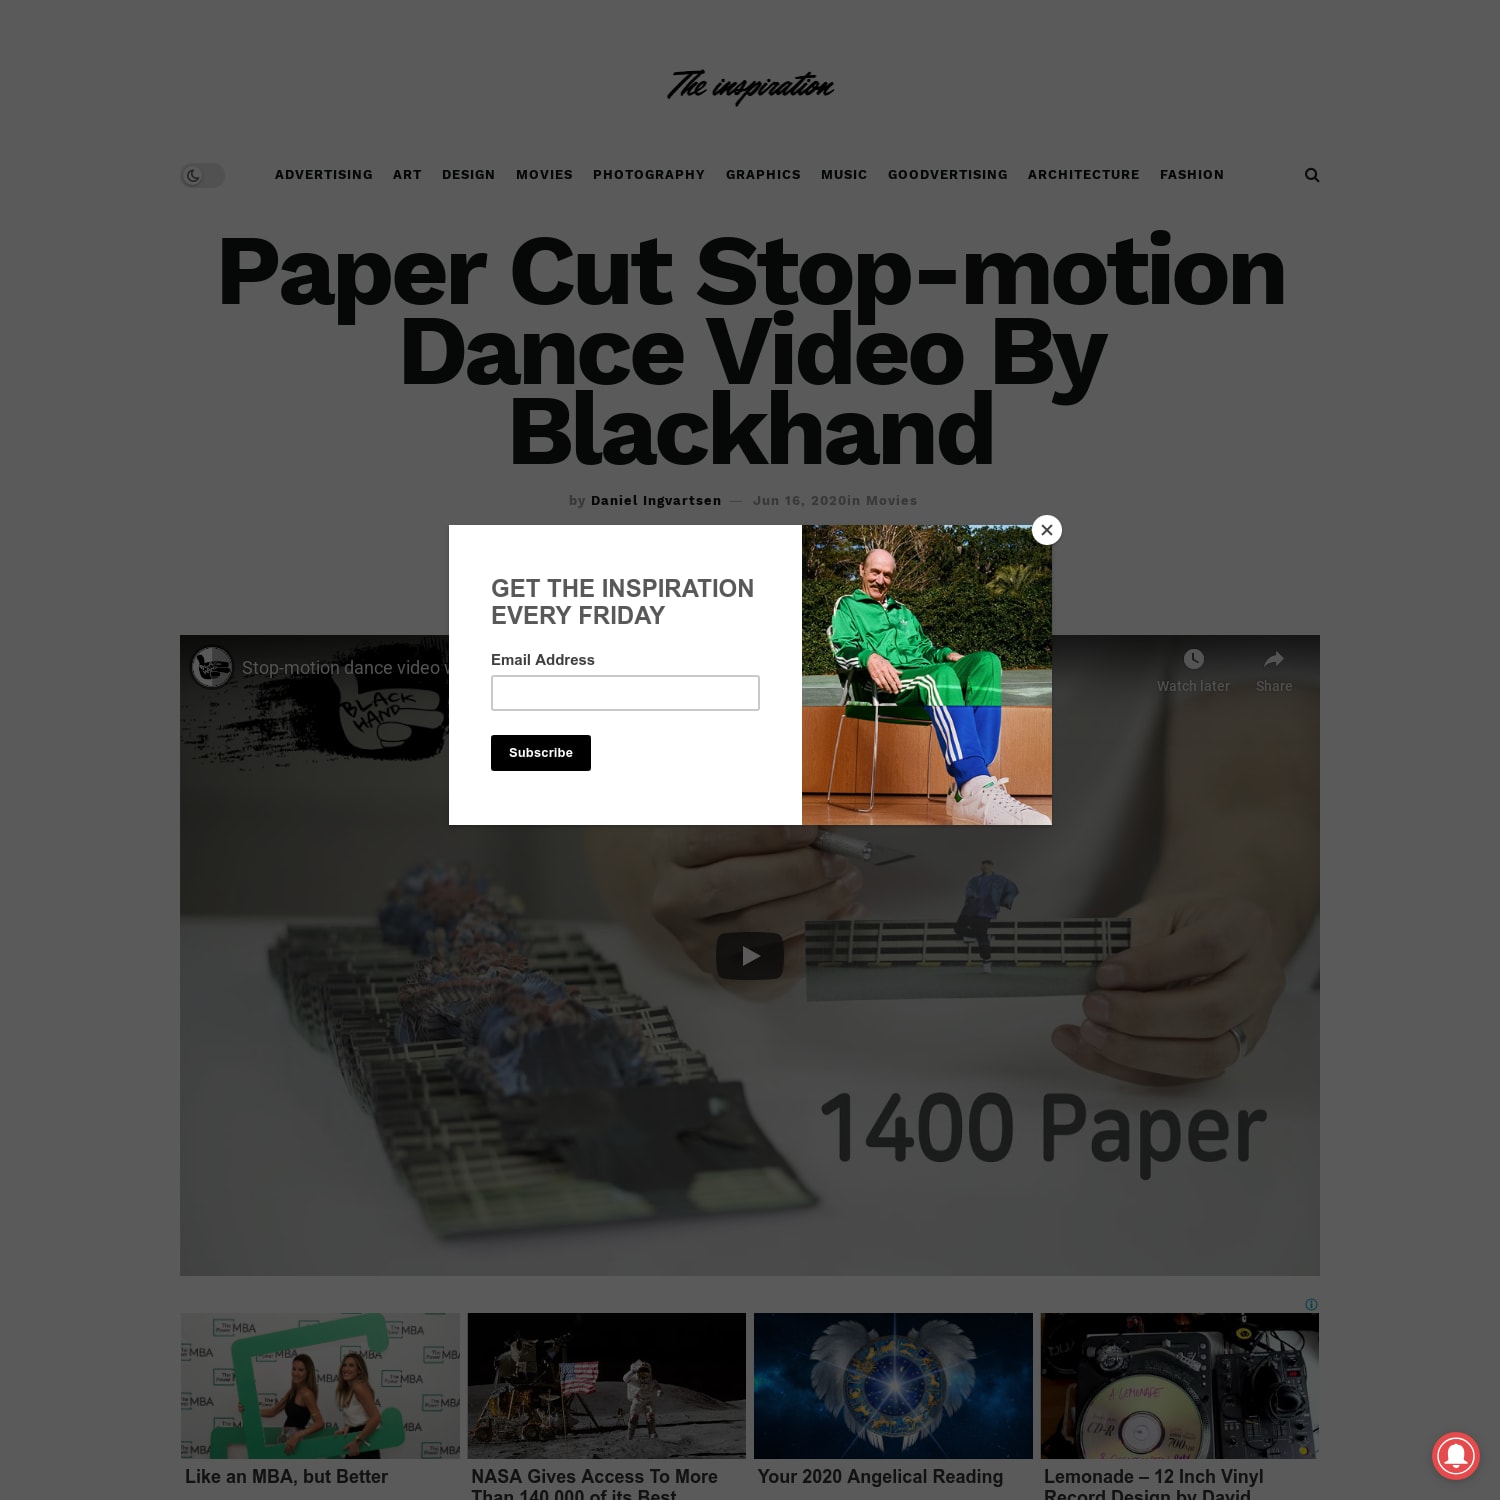 Paper Cut Stop-motion Dance Video By Blackhand